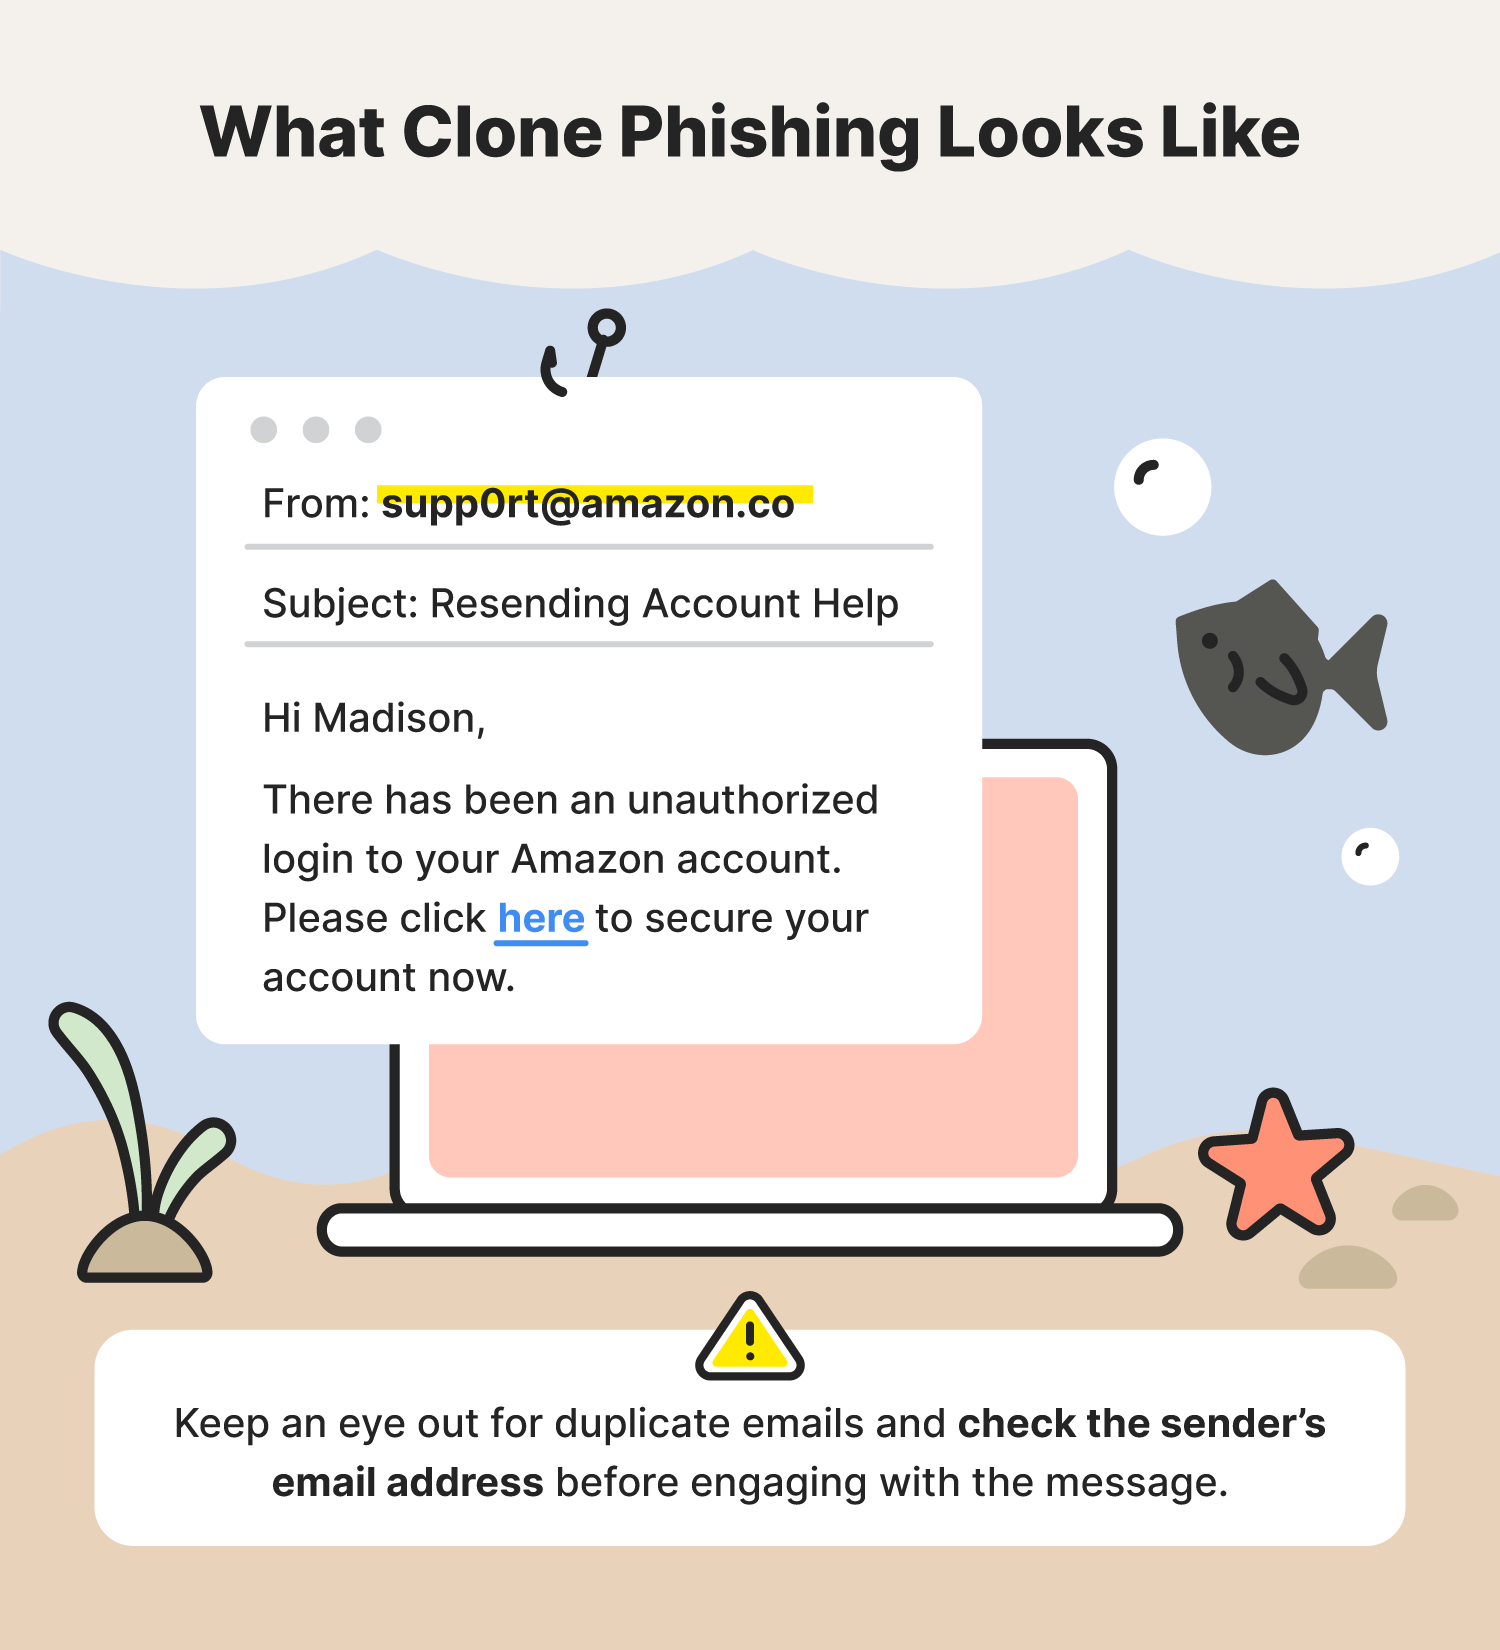 A graphic shows an example of clone phishing, one of the common types of phishing attacks.